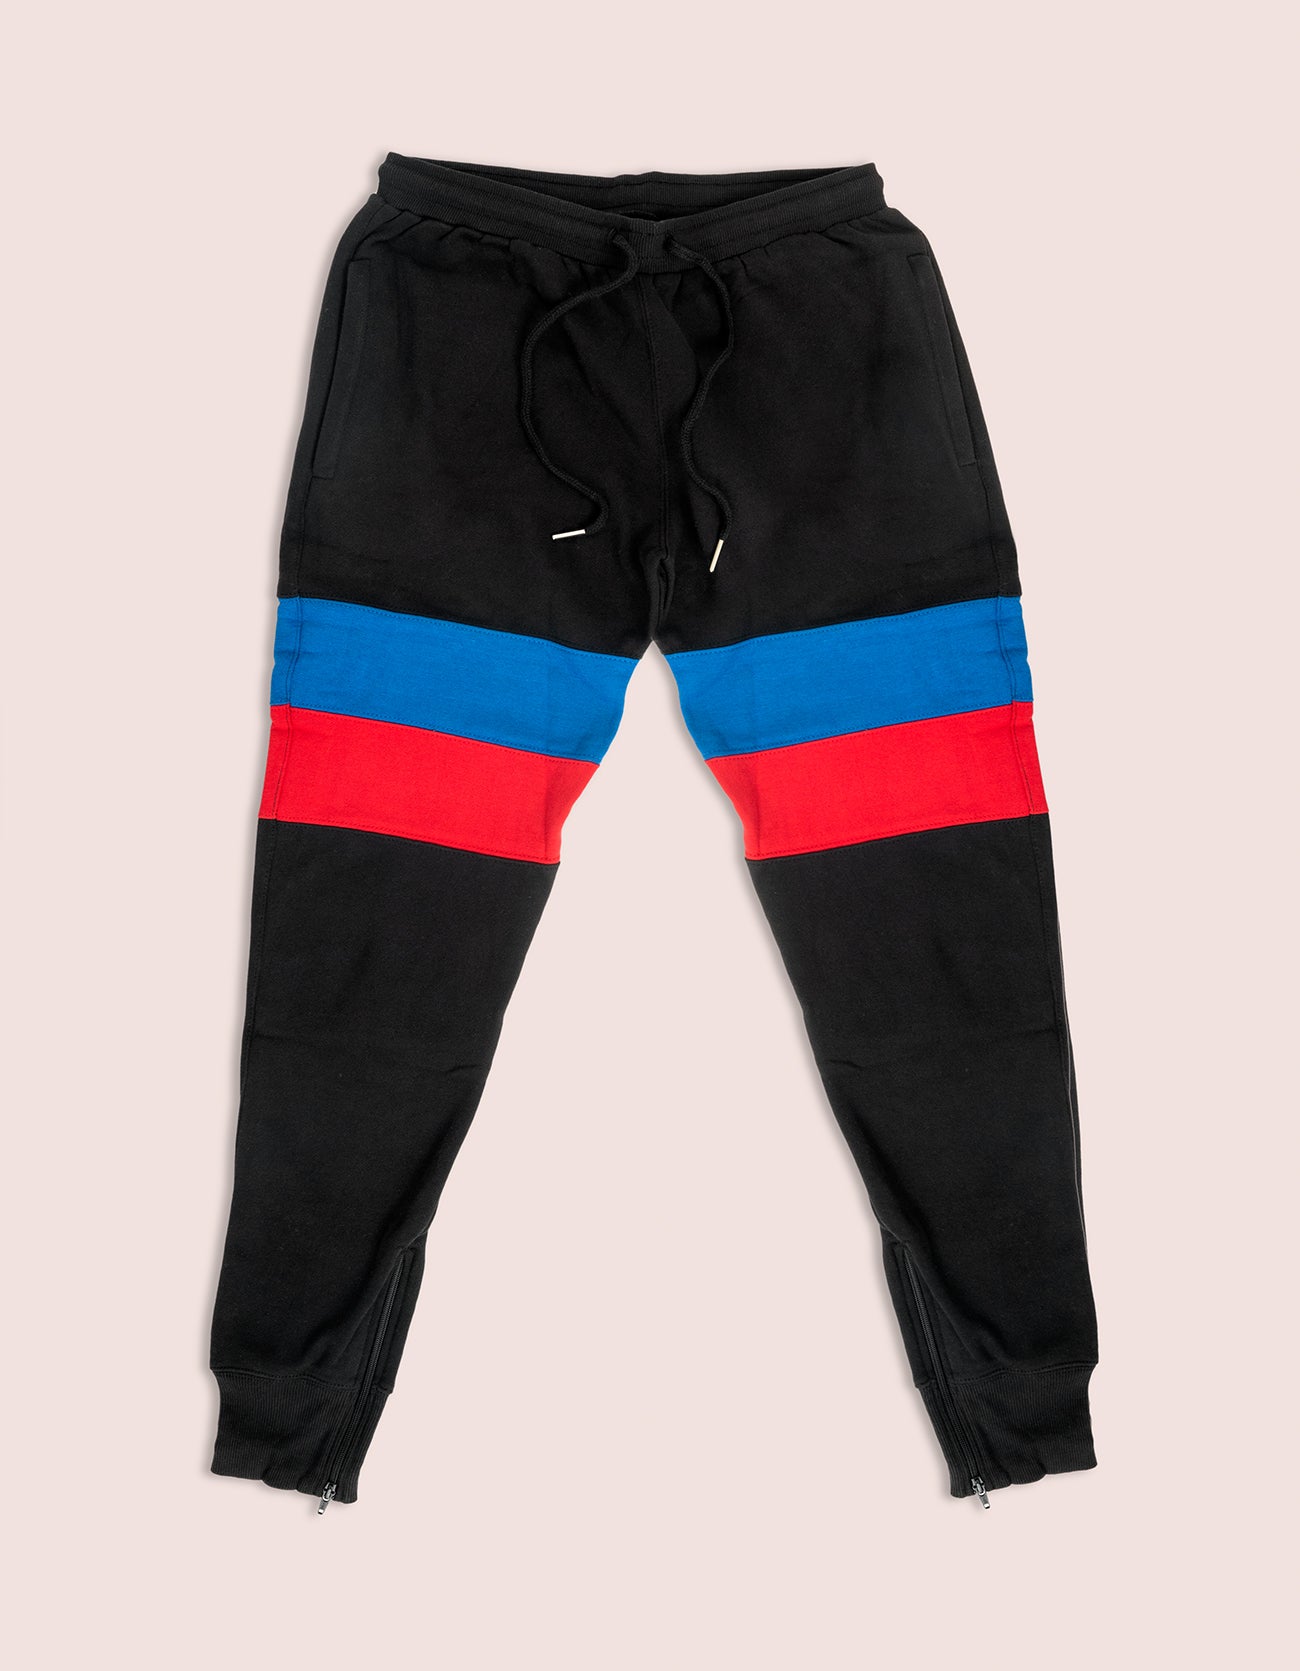 Dipset Couture Black/Blue/Red Sweatsuit